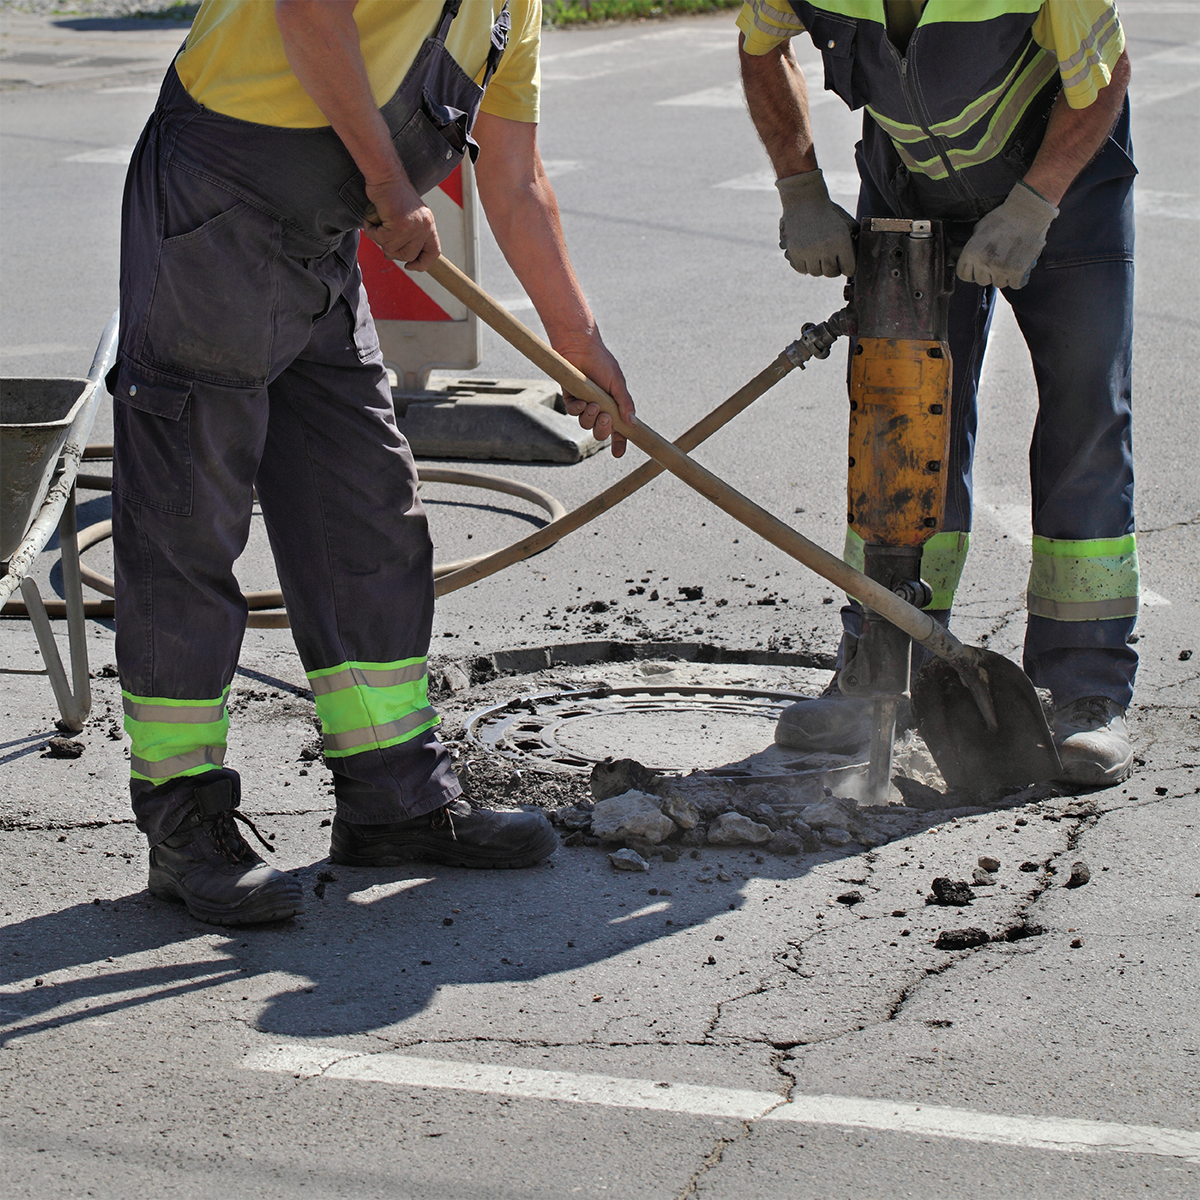 Workers near sewer manhole chipping asphalt with jackhammer